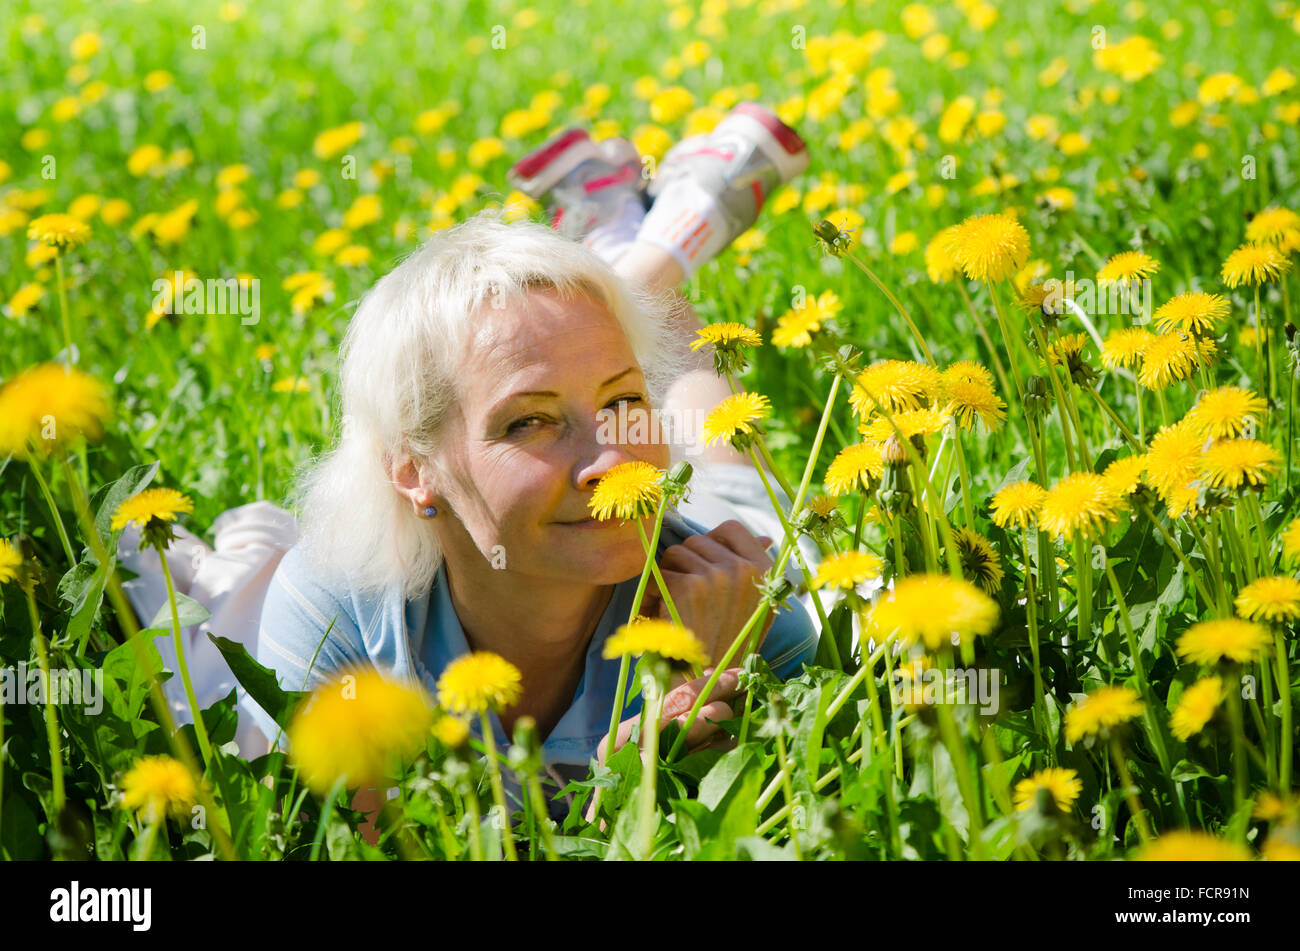 A woman lies in a clearing among the dandelions and sniffs a flower Stock Photo